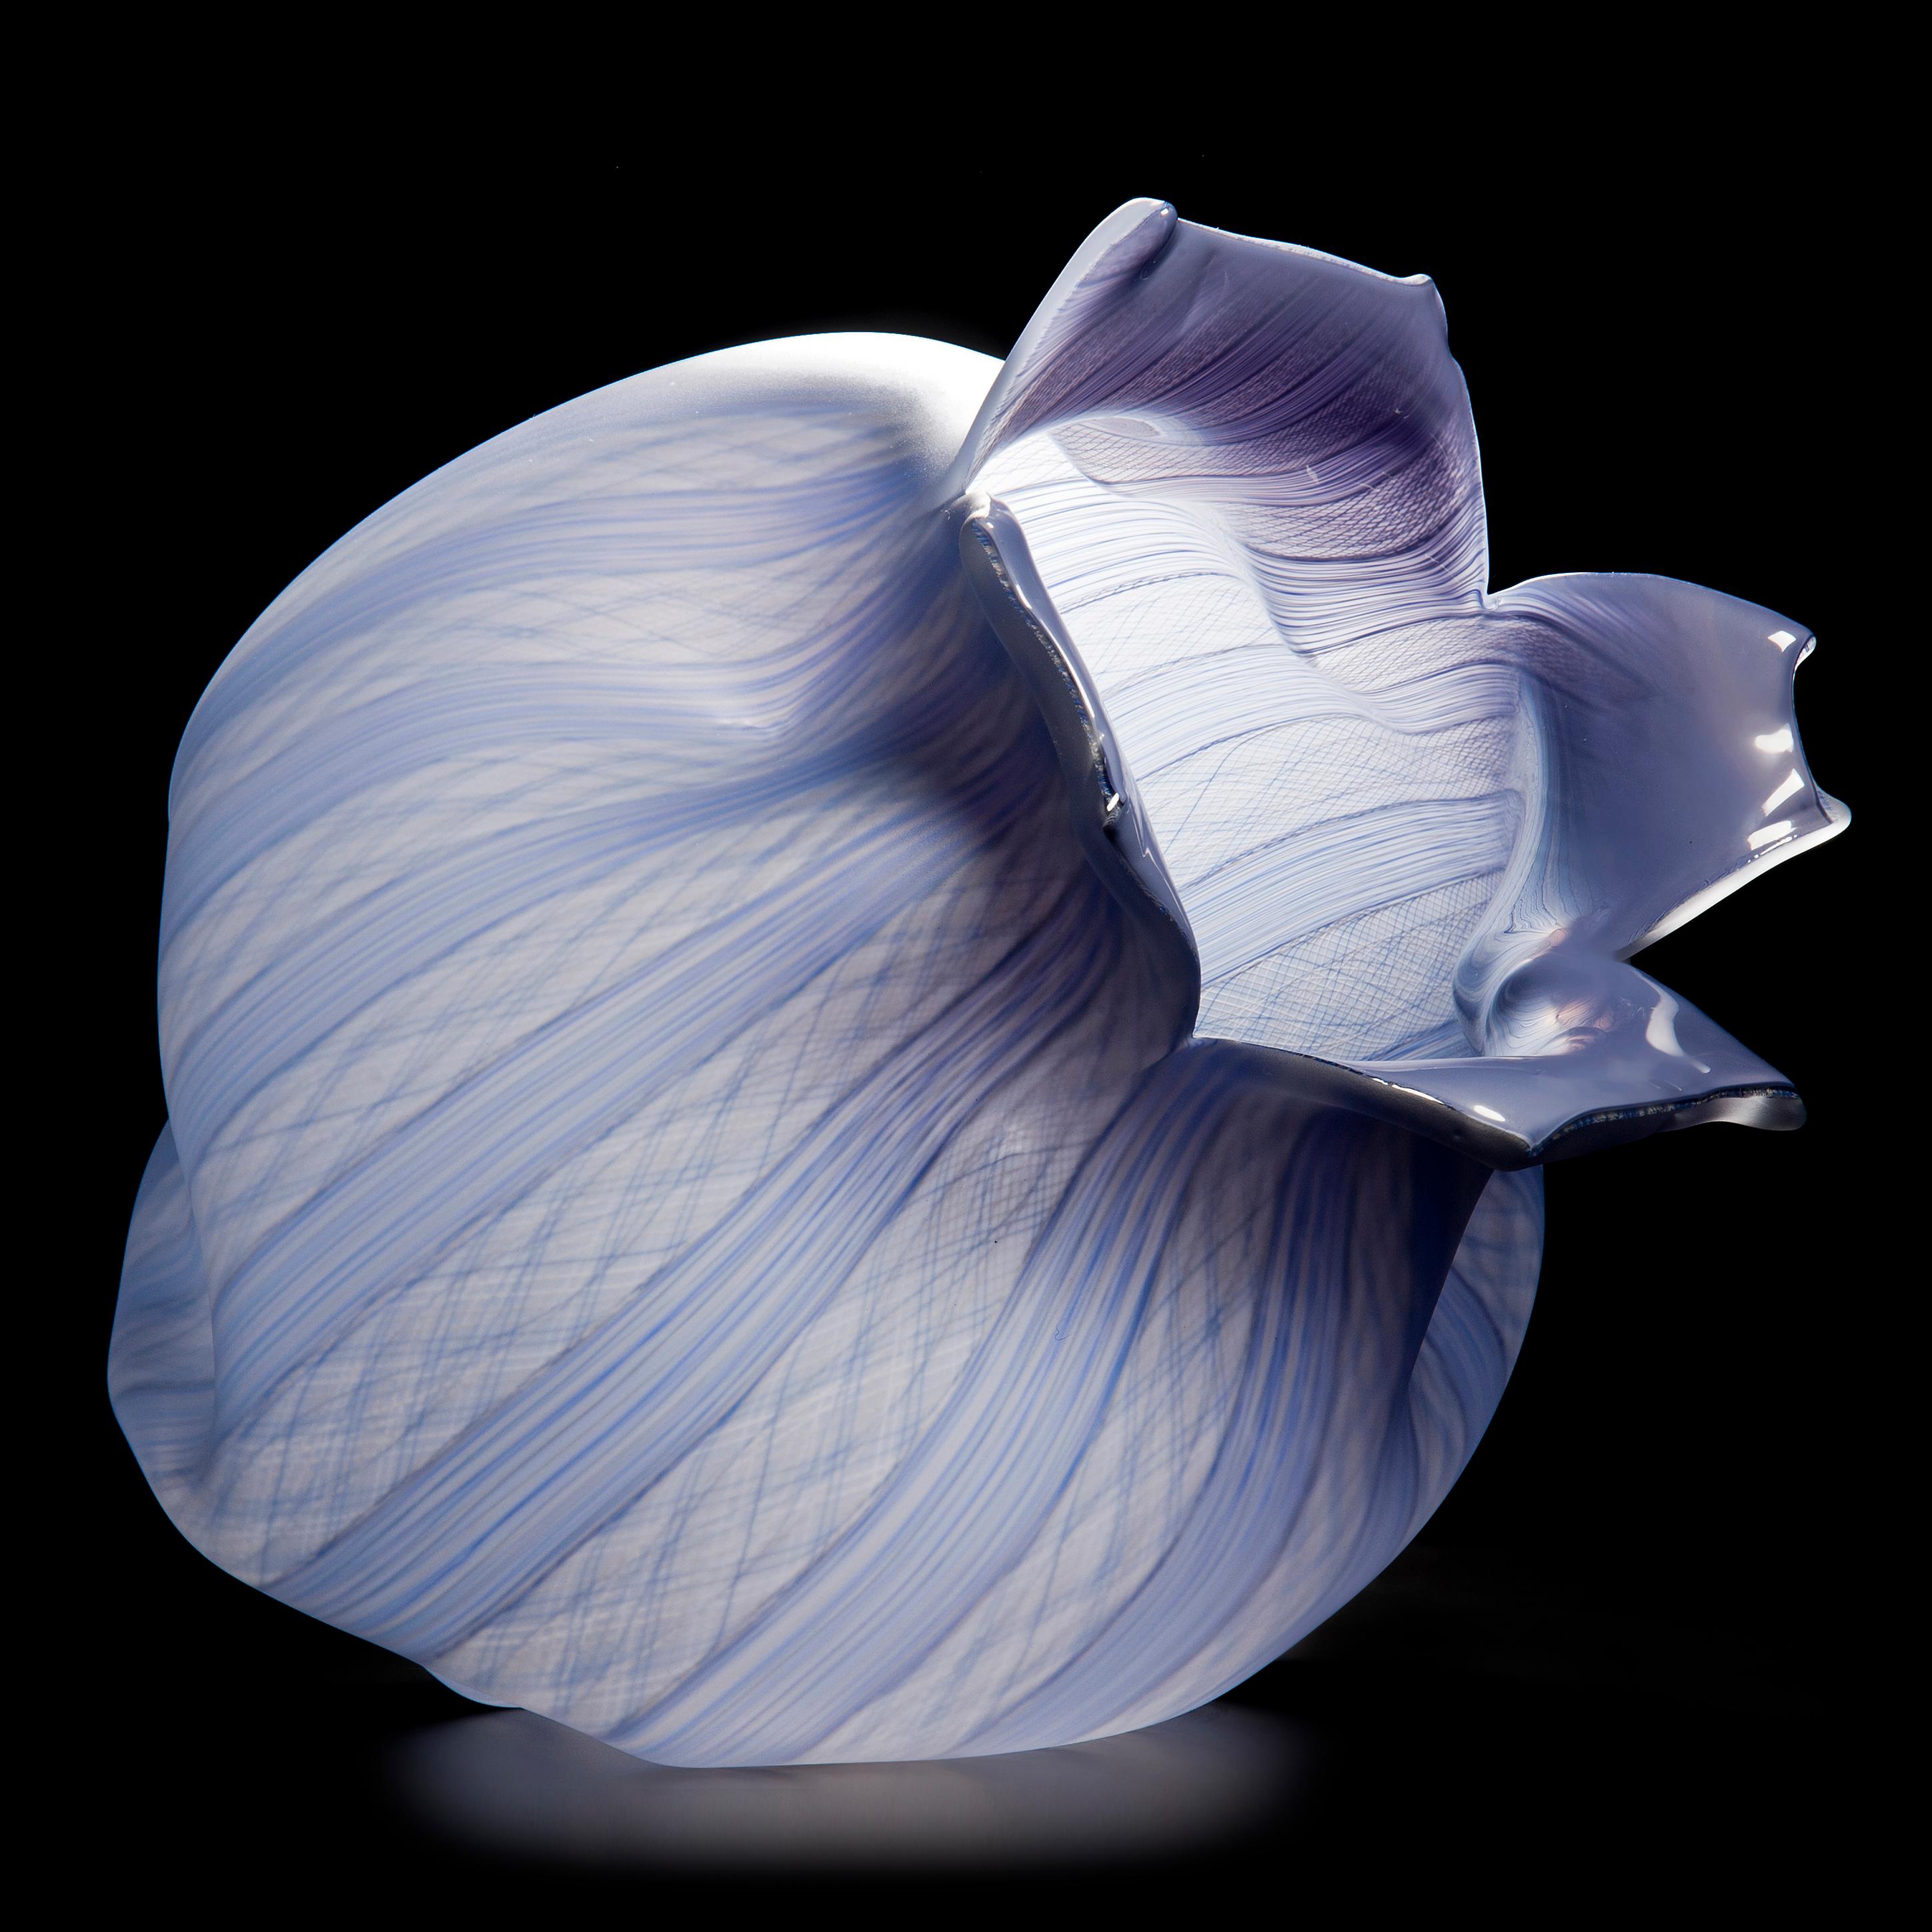 French Filigree Spirit Fruit, a Lilac Glass Sculpture by Jeremy Maxwell Wintrebert